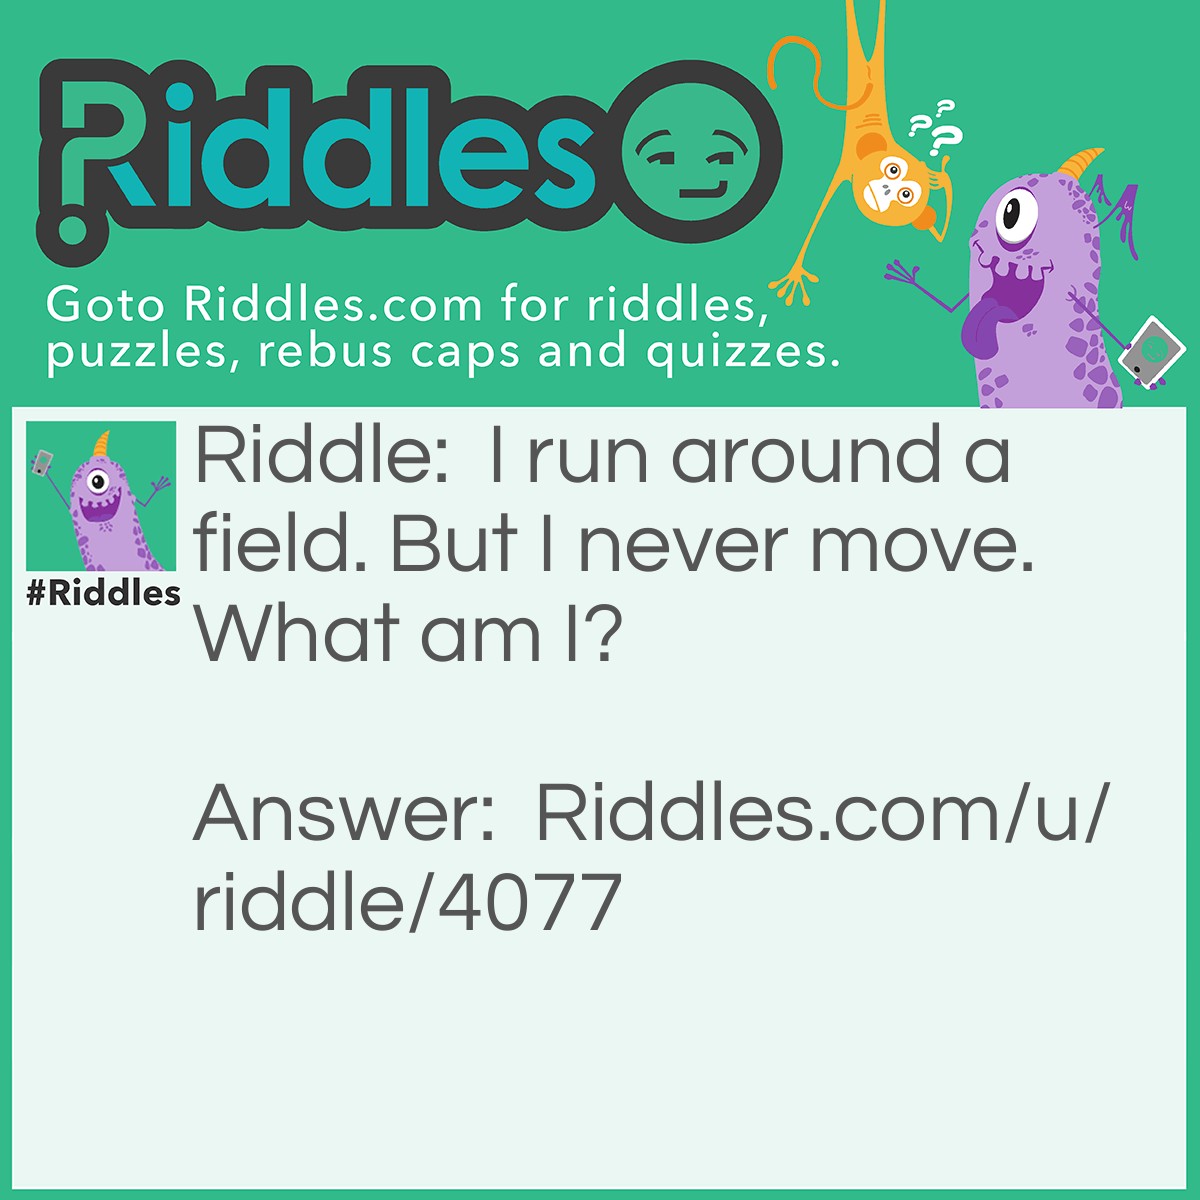 Riddle: I run around a field. But I never move. What am I? Answer: A fence.